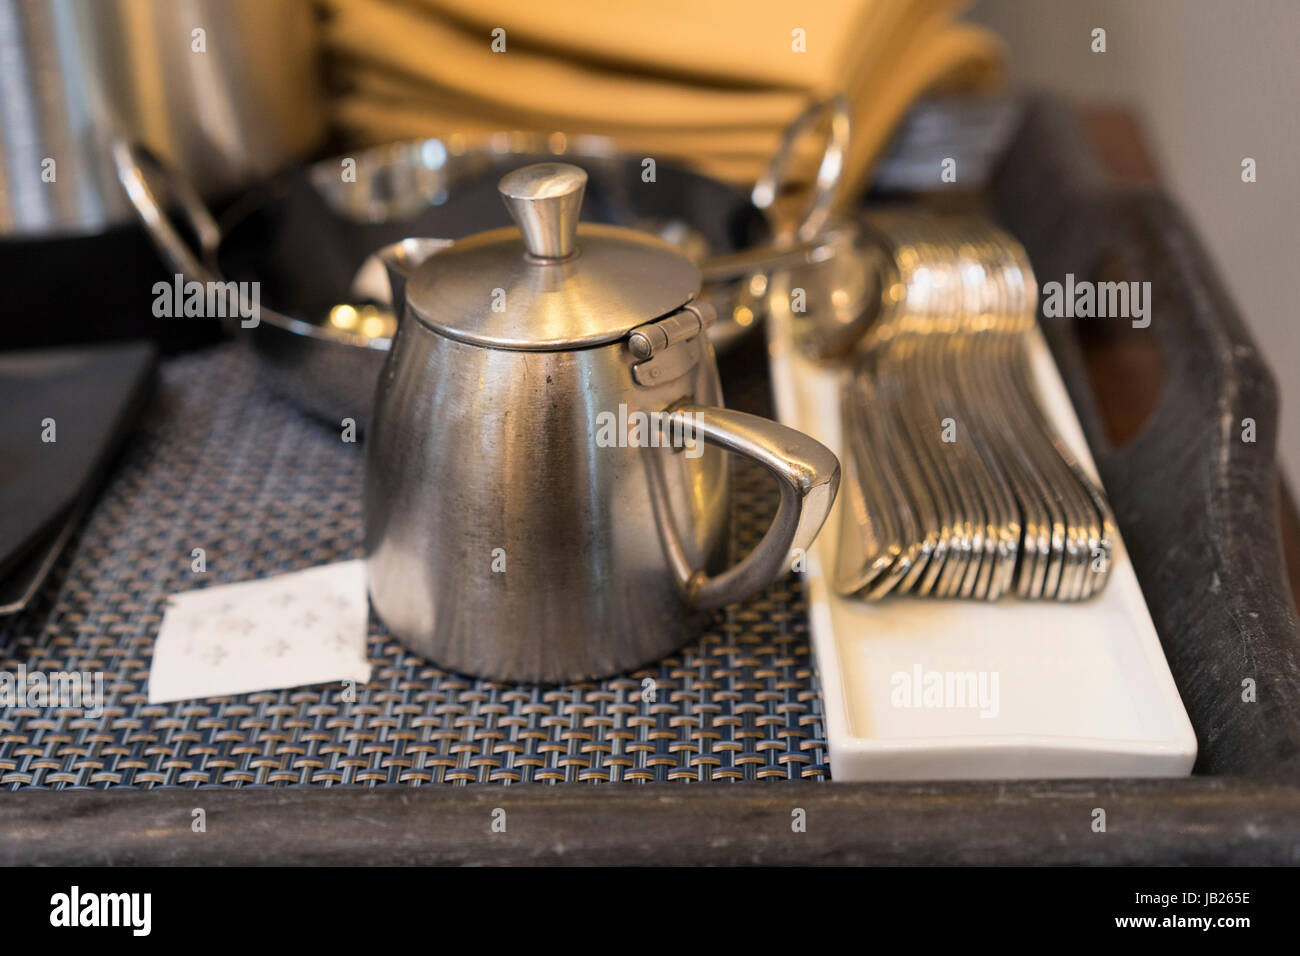 Coffee And Tea Pots With Spoons And Napkins Stock Photo